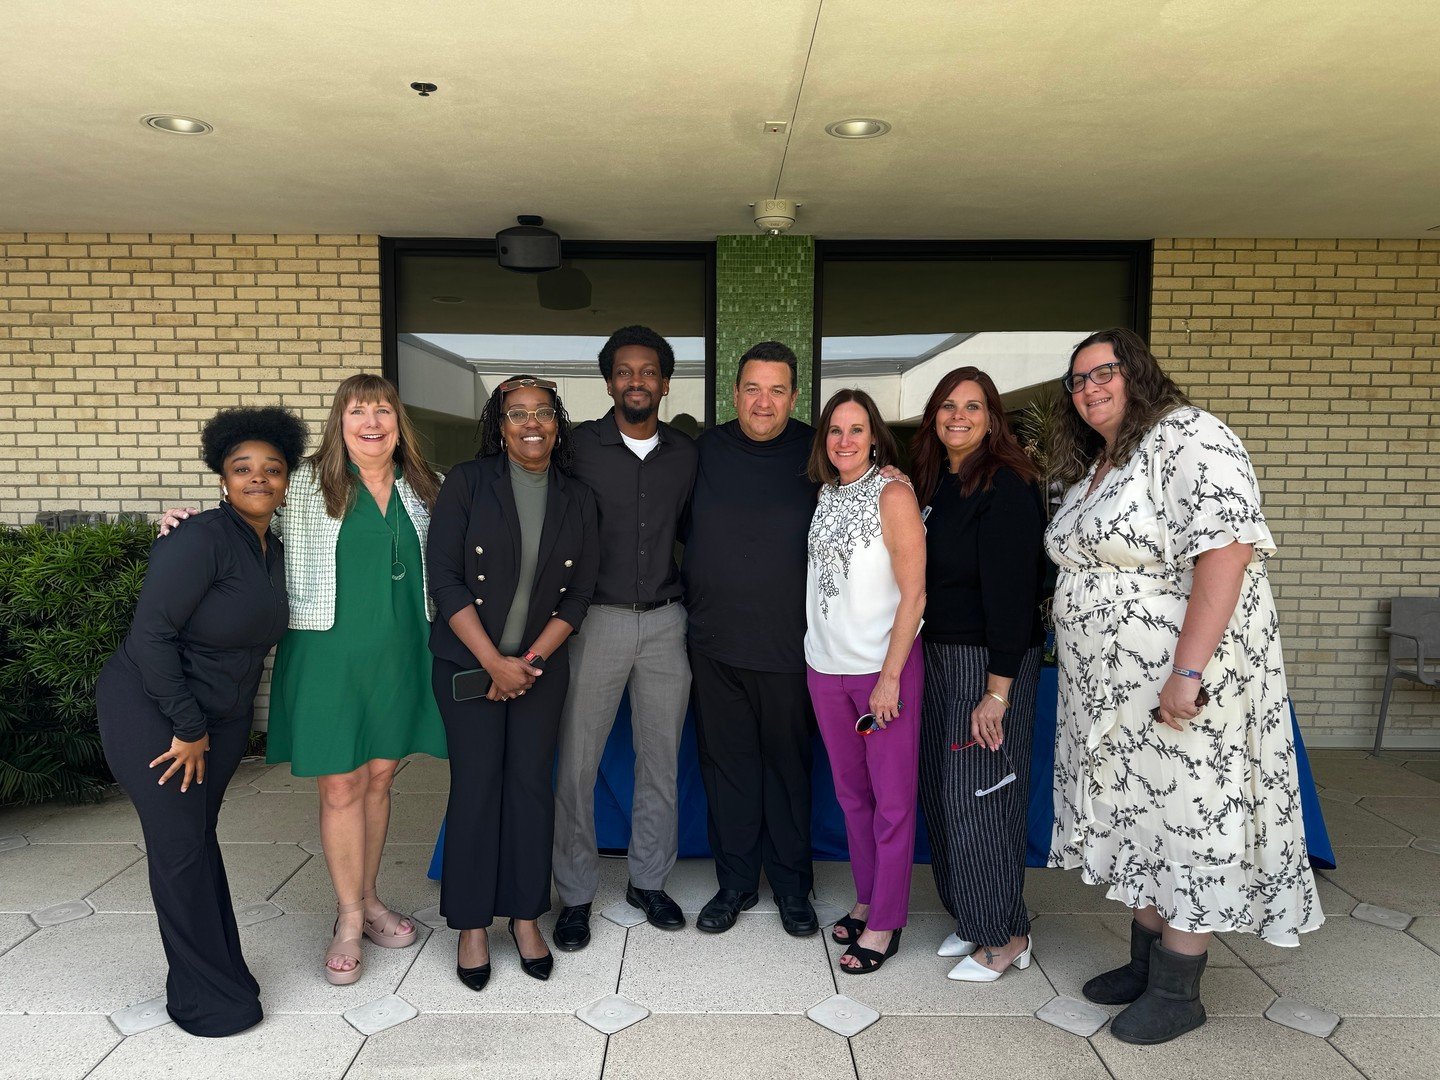 With May being National Mental Health Awareness Month, we want to take this opportunity to spotlight our tenant, NAMI Jacksonville. NAMI's mission to support and enhance the lives of people and families affected by mental illness and substance abuse 